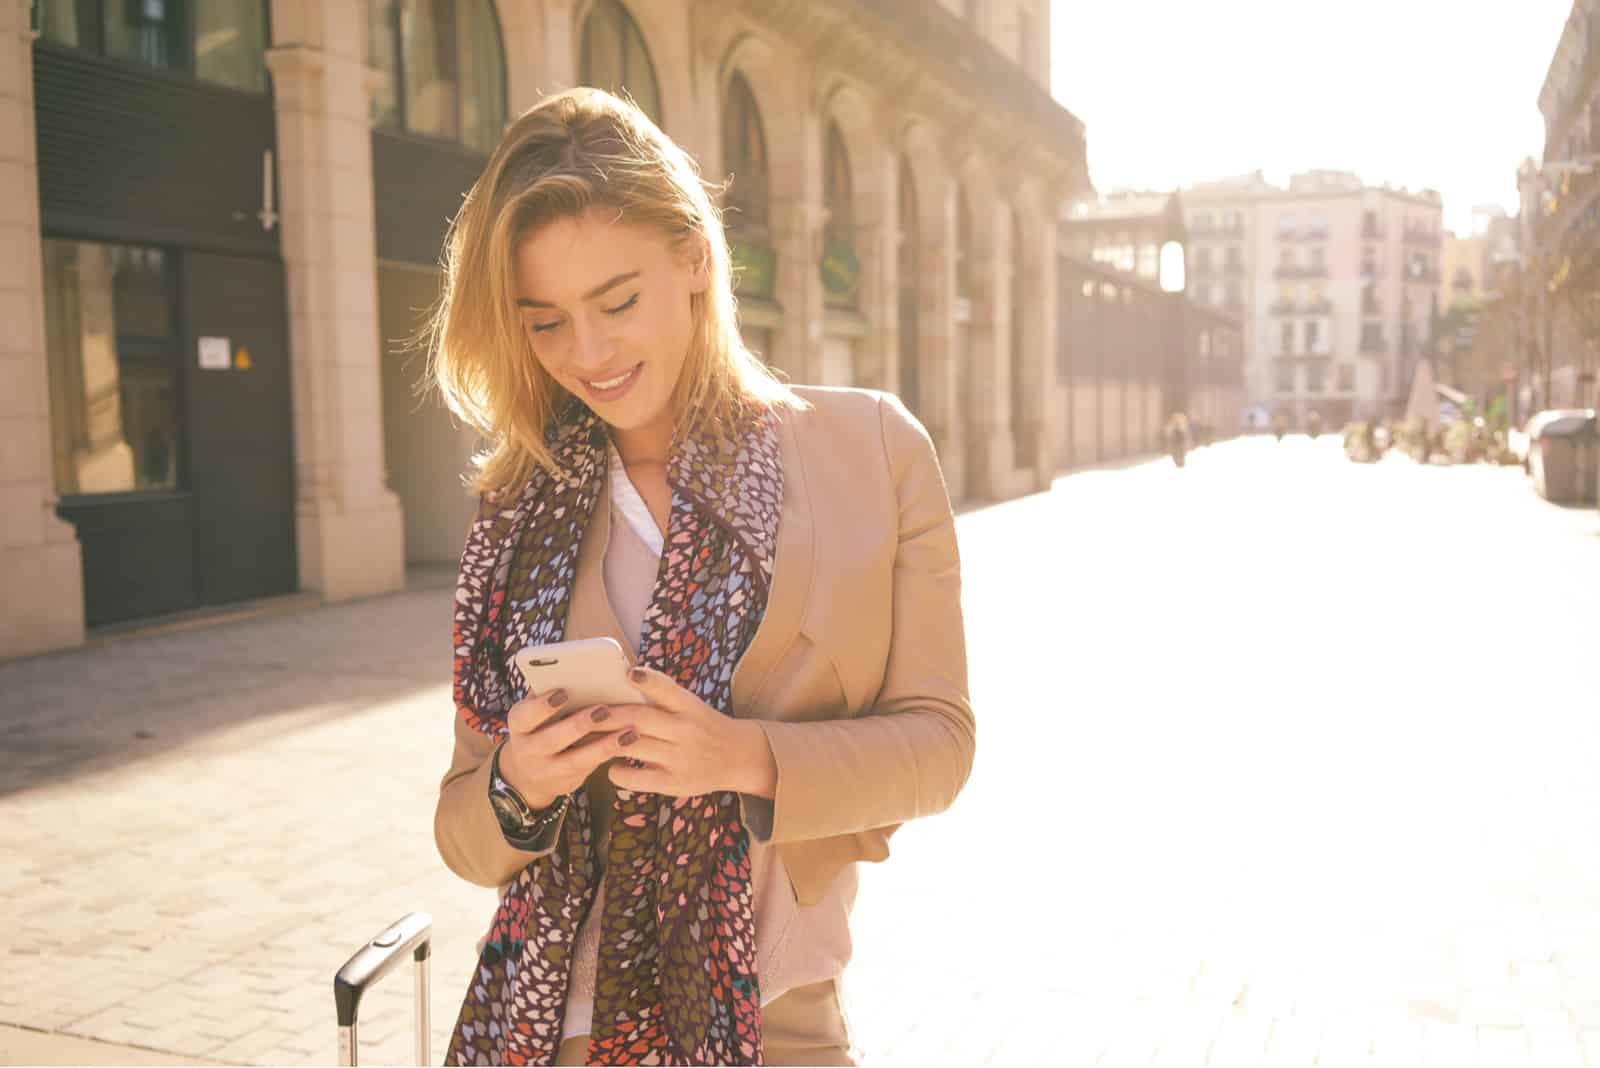 a smiling woman standing on the street and pressing a phone